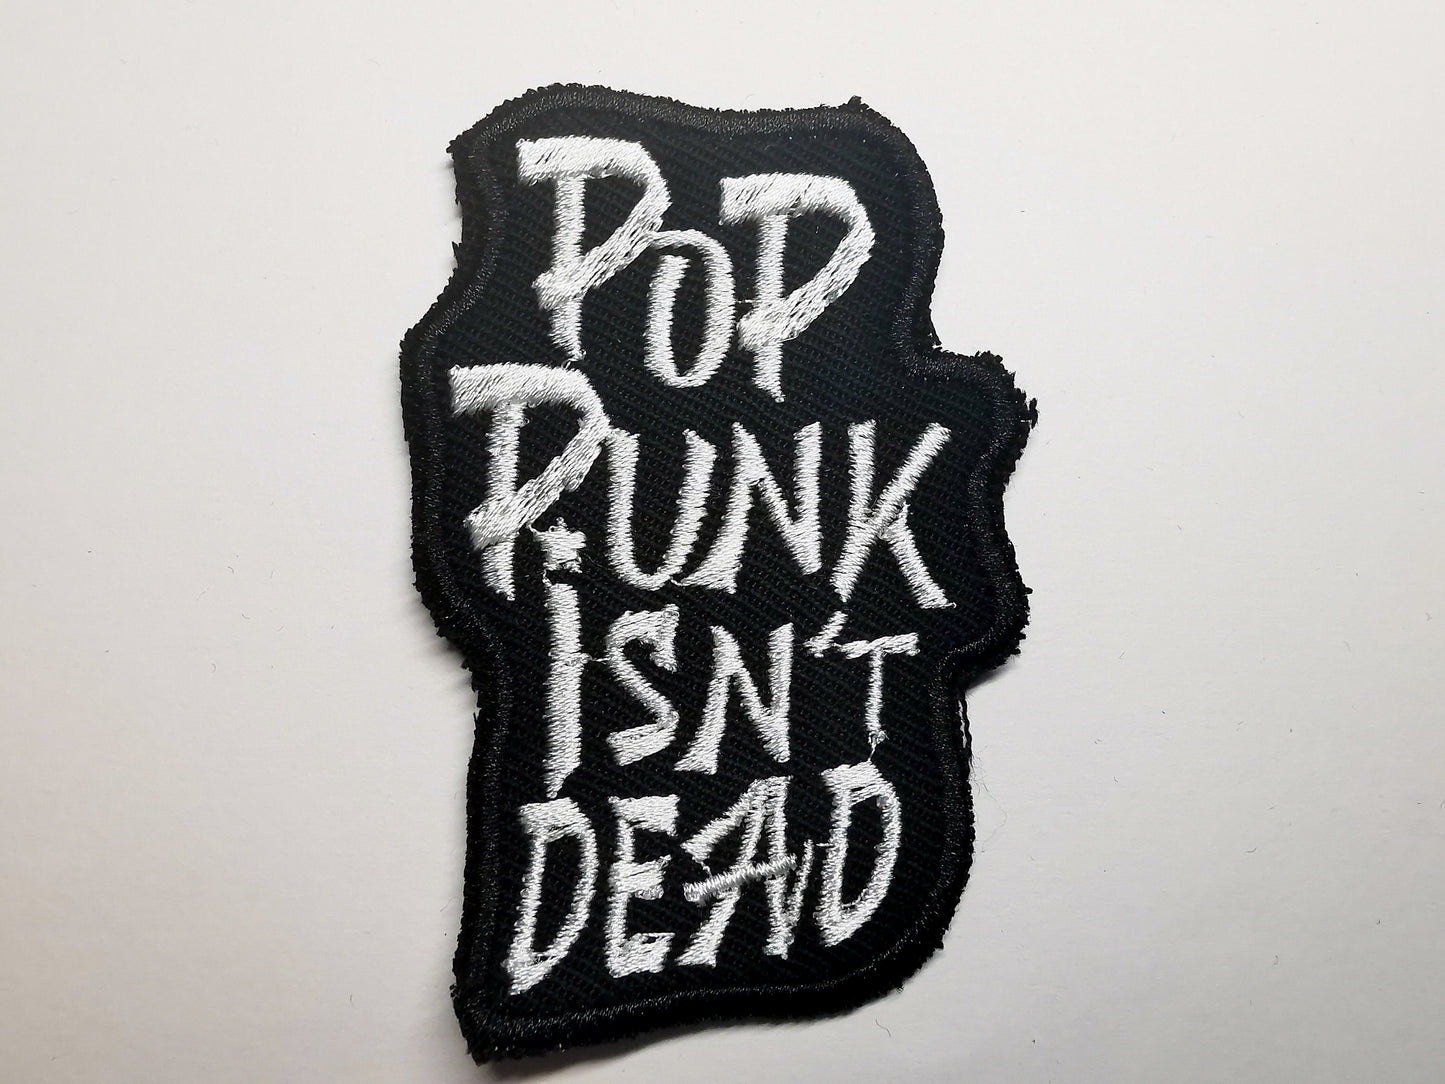 Pop Punk Isn't Dead Embroidered Iron On Patch Pop Punk 2022 Revival MGK Yung